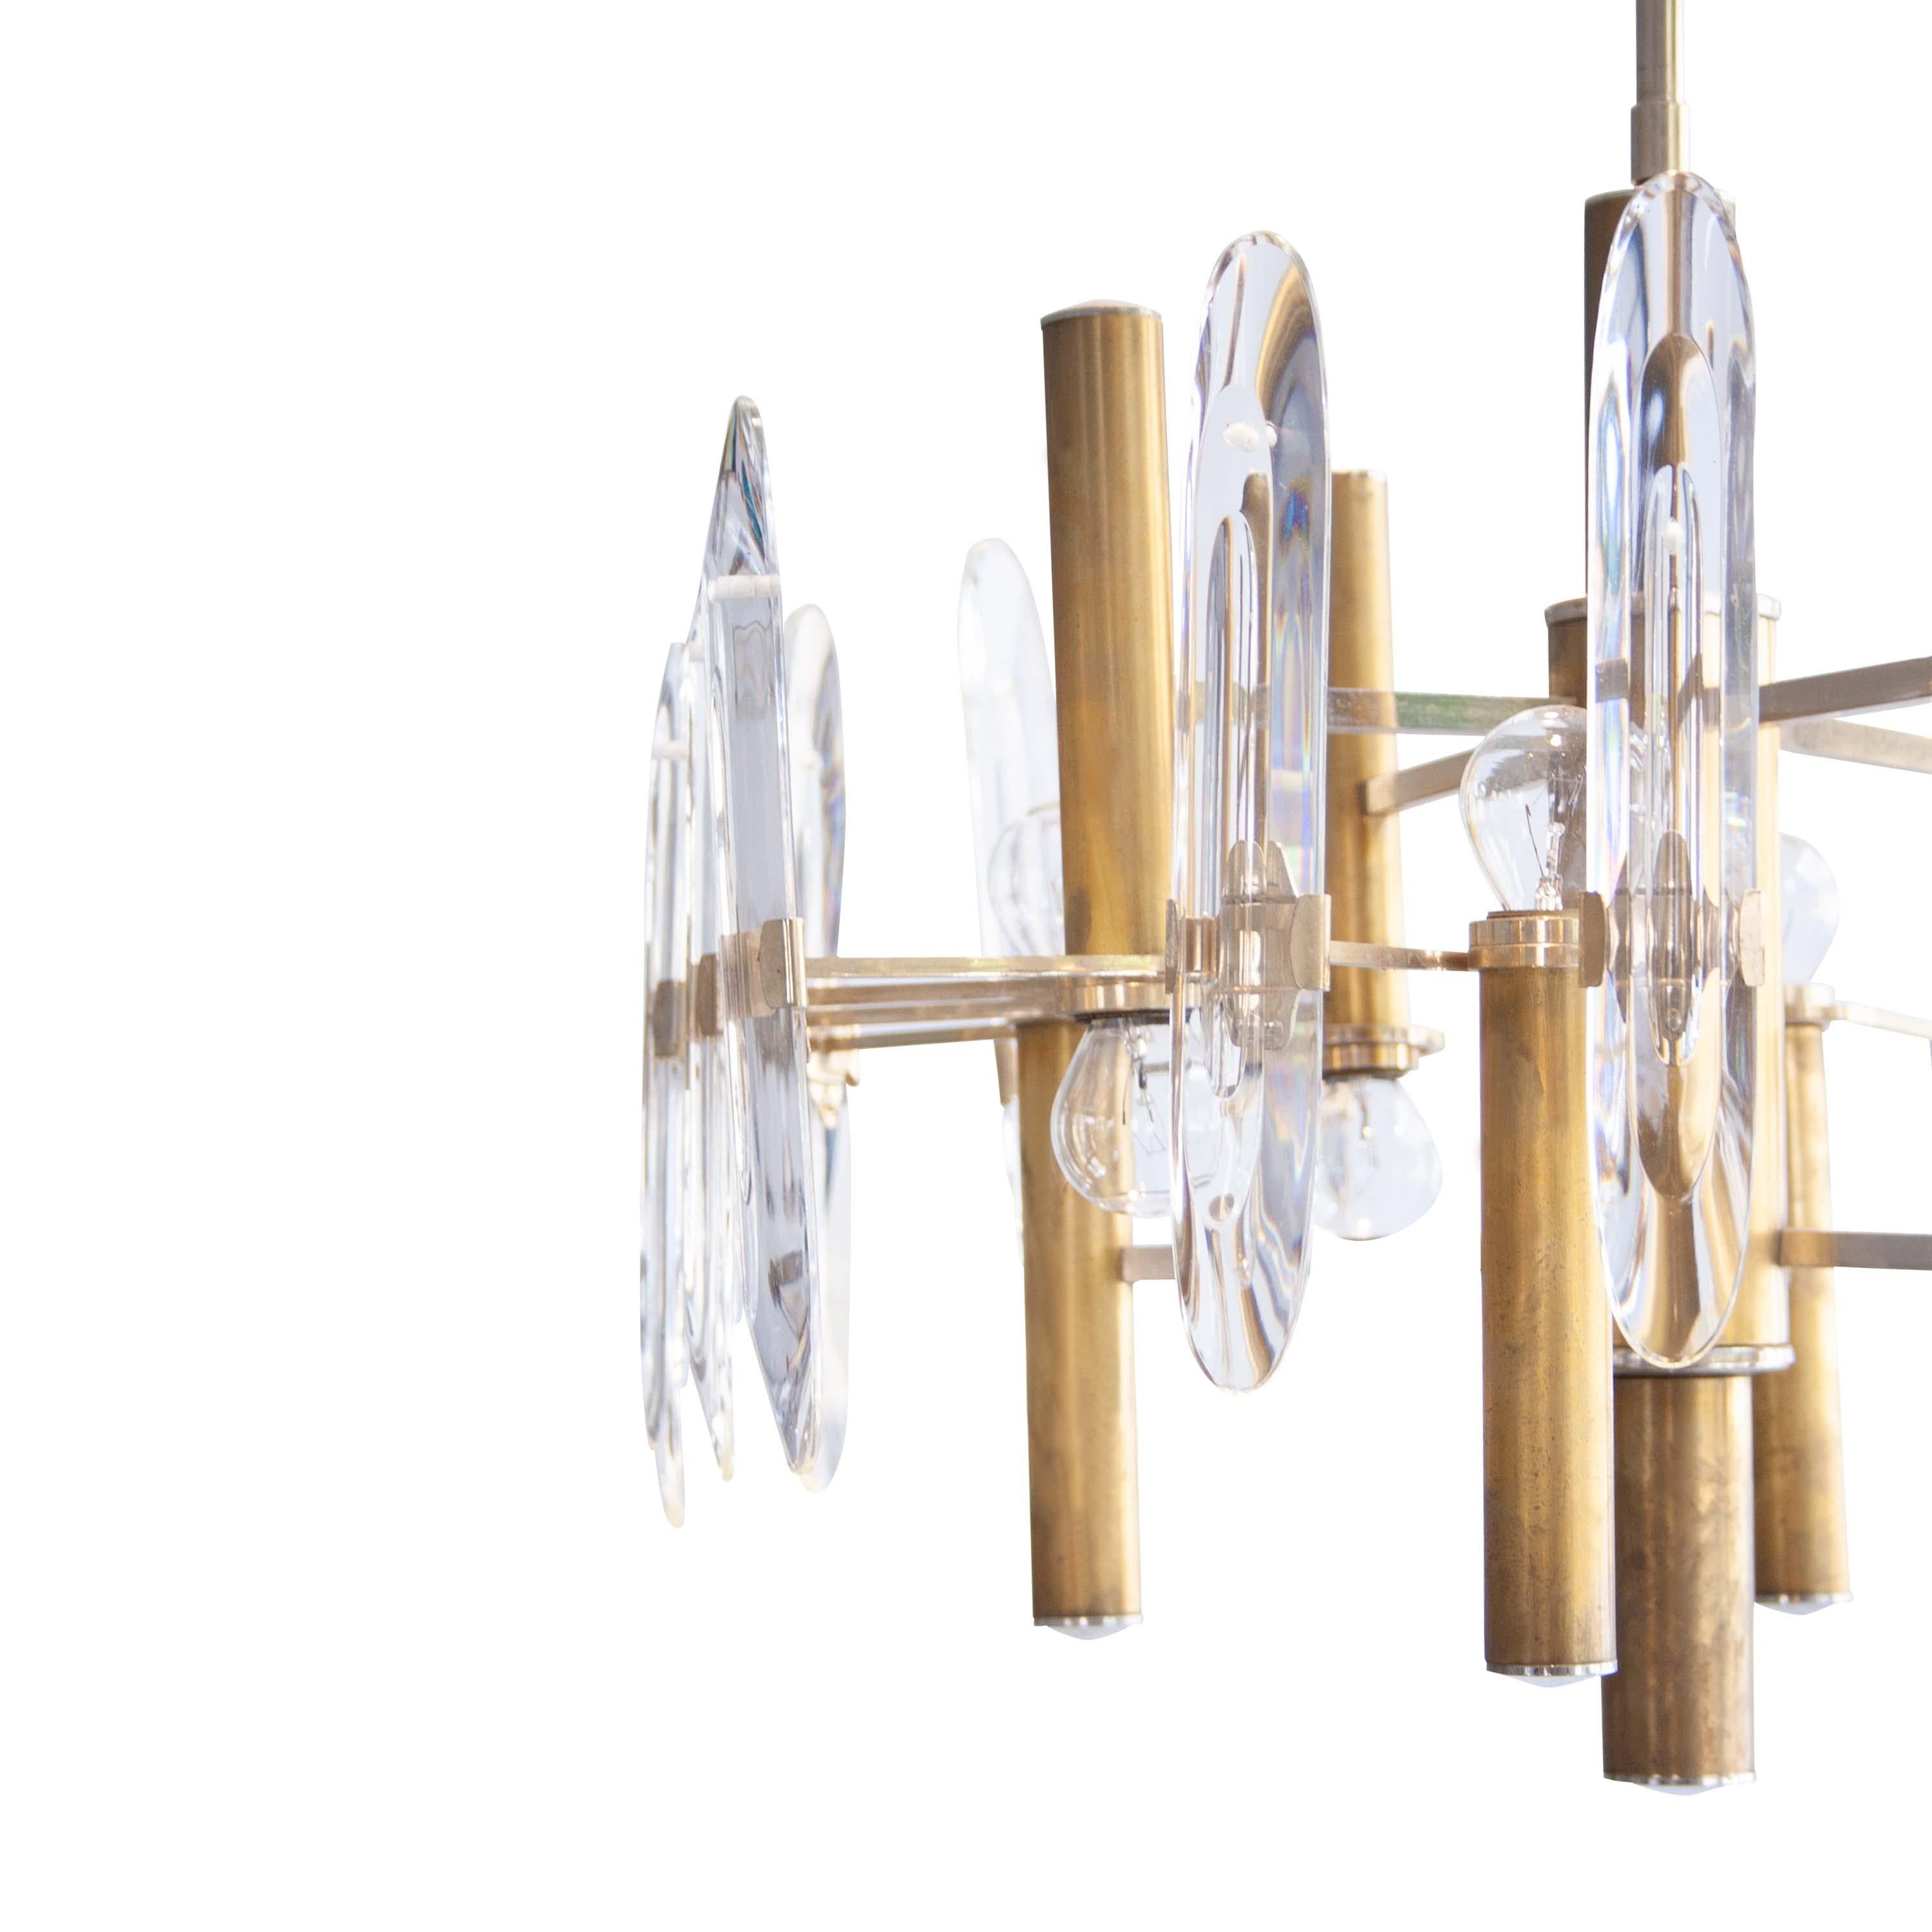 Gaetano Sciolari's Italian chandelier from the 1960s.
The chandelier consists of eight brass arms and glass pendants that attach to each arm. The light bulb placement alternated up and down.
    